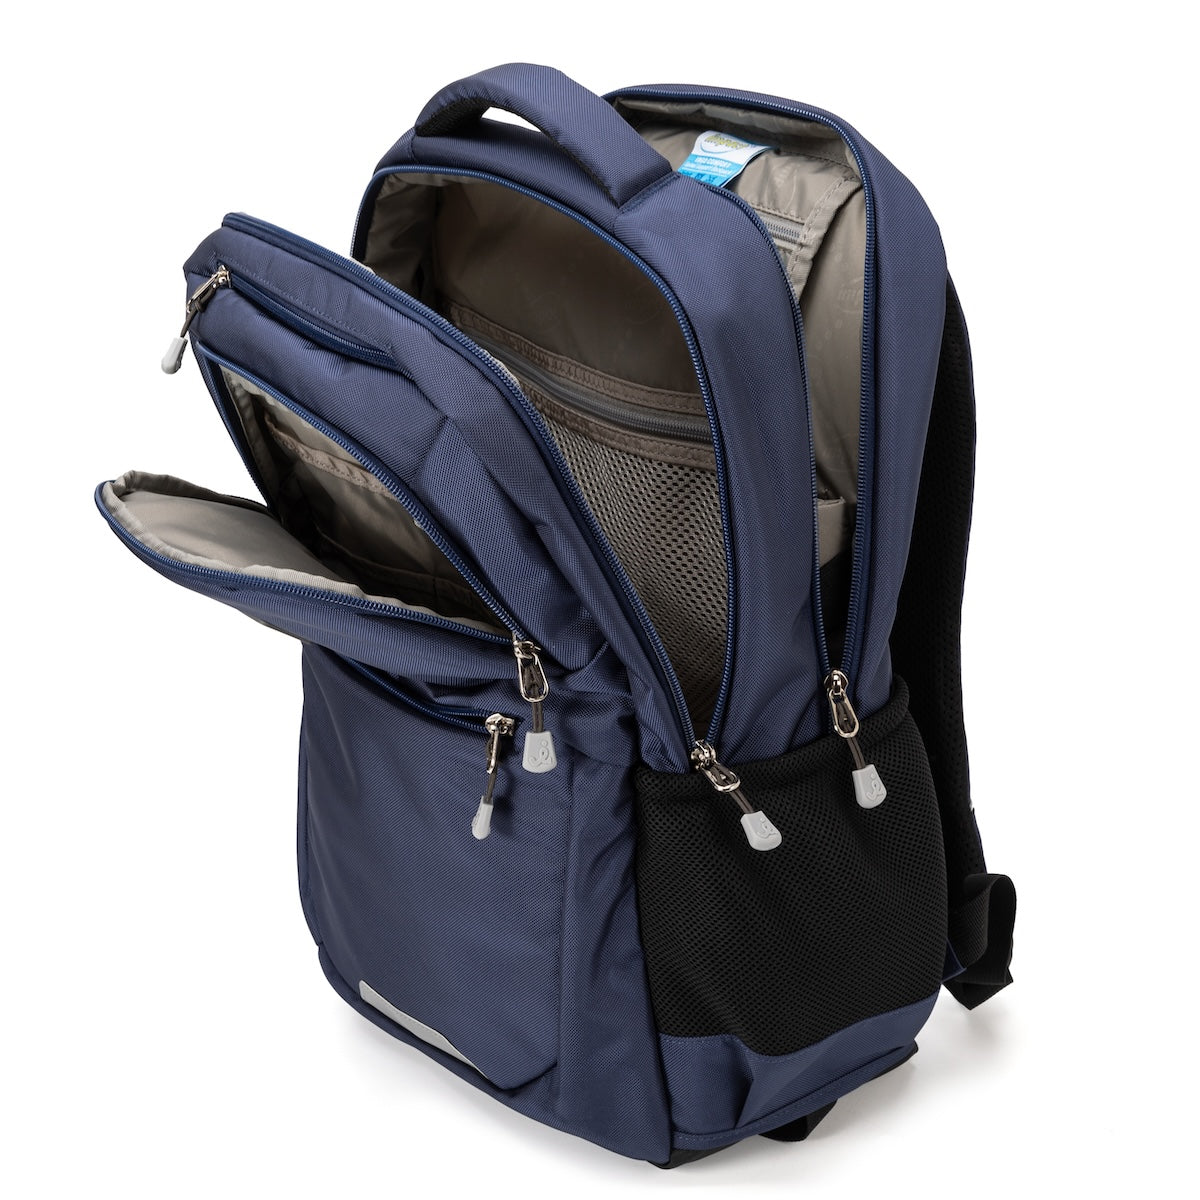 IMPACT - IP-2300 - Impact Ergo-Comfort Spinal Support Detachable Trolley Backpack